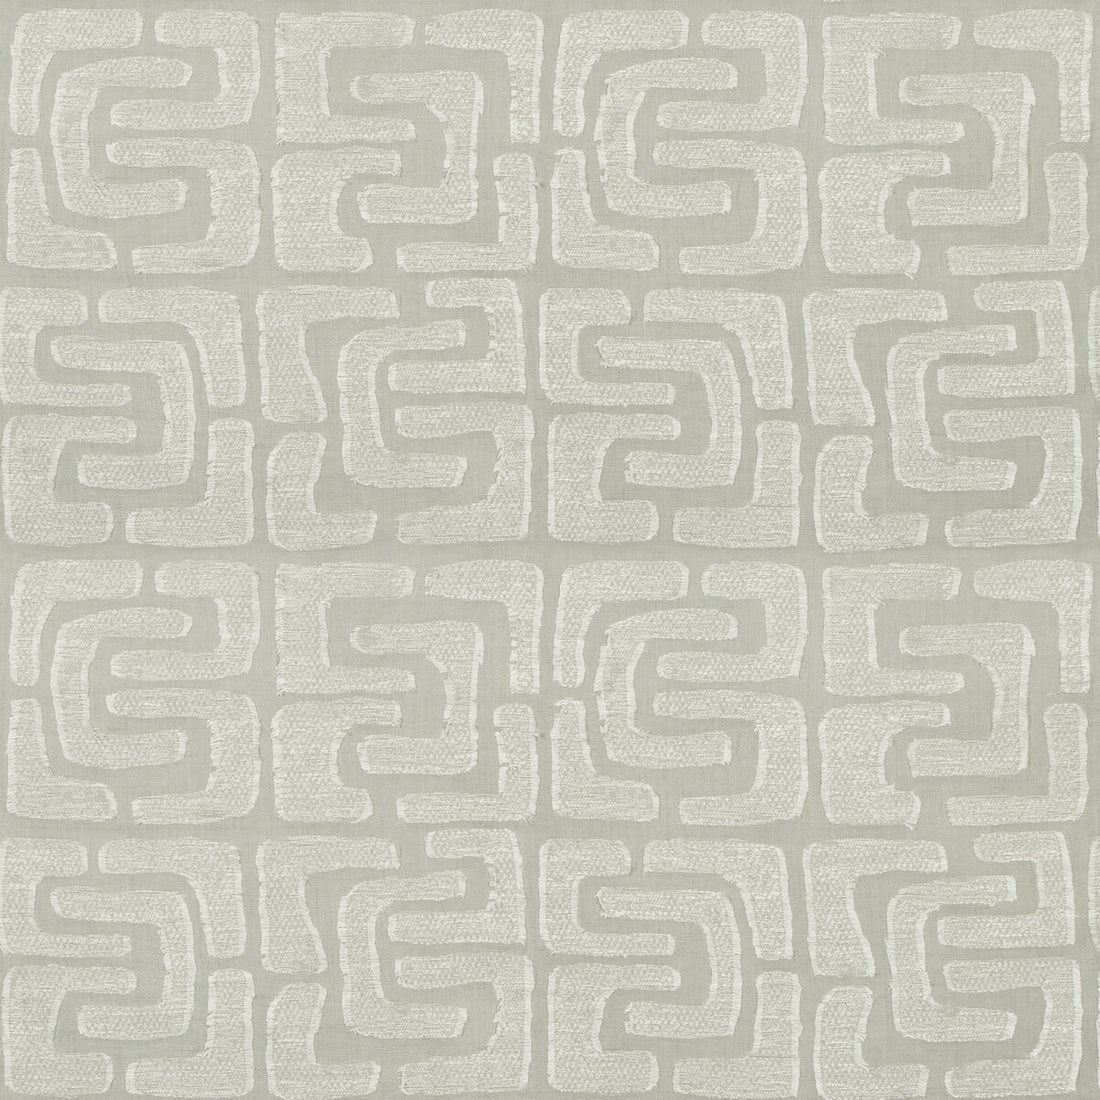 Oui Fringe fabric in mist color - pattern 4810.11.0 - by Kravet Couture in the Linherr Hollingsworth Boheme II collection